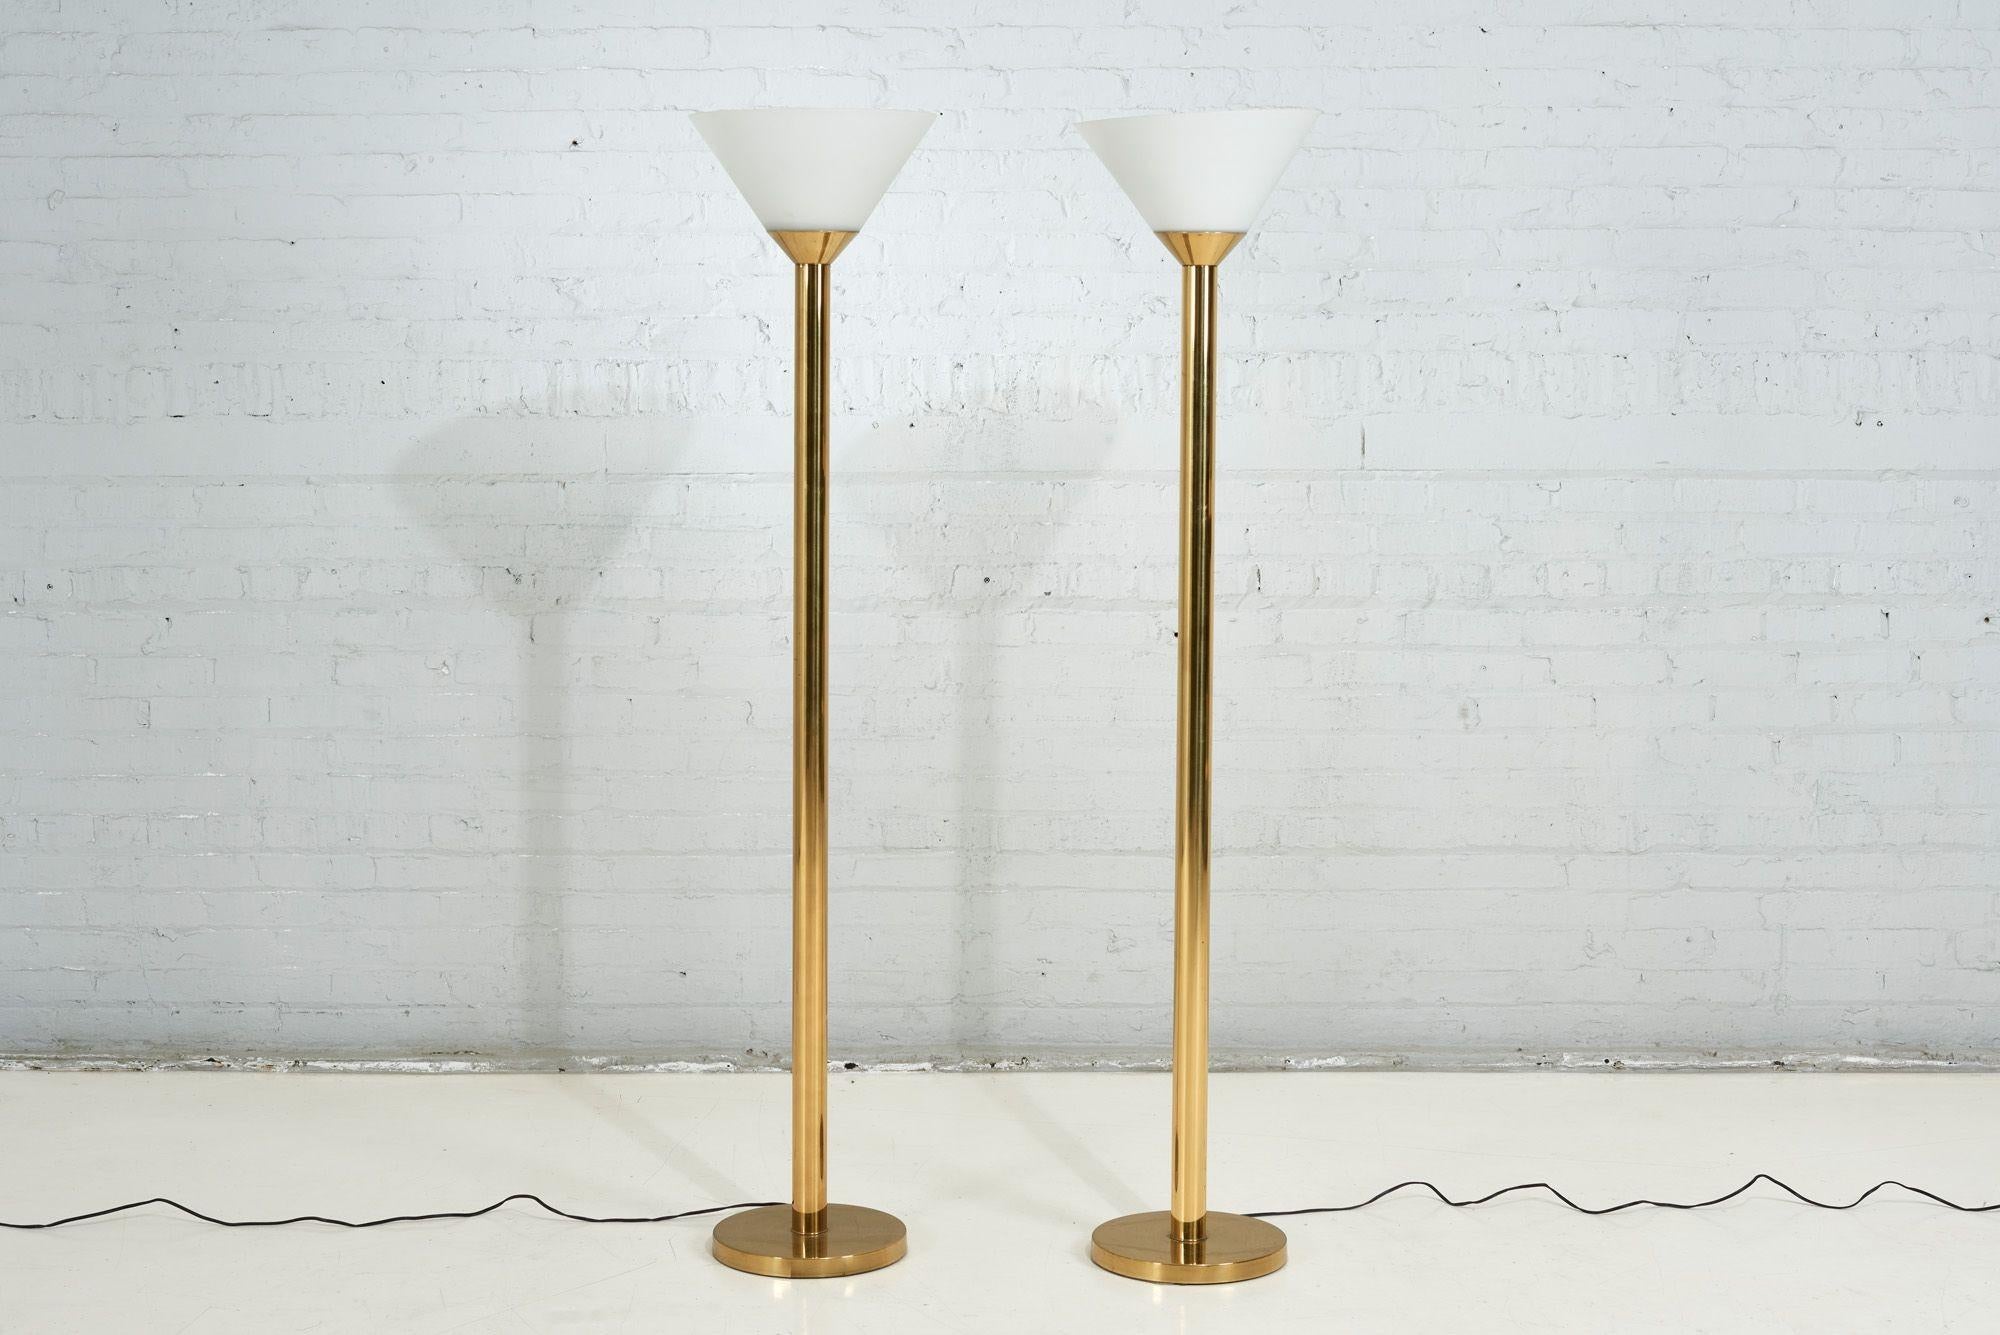 Italian midcentury Brass and Glass Torchiere Floor Lamps, 1960.  